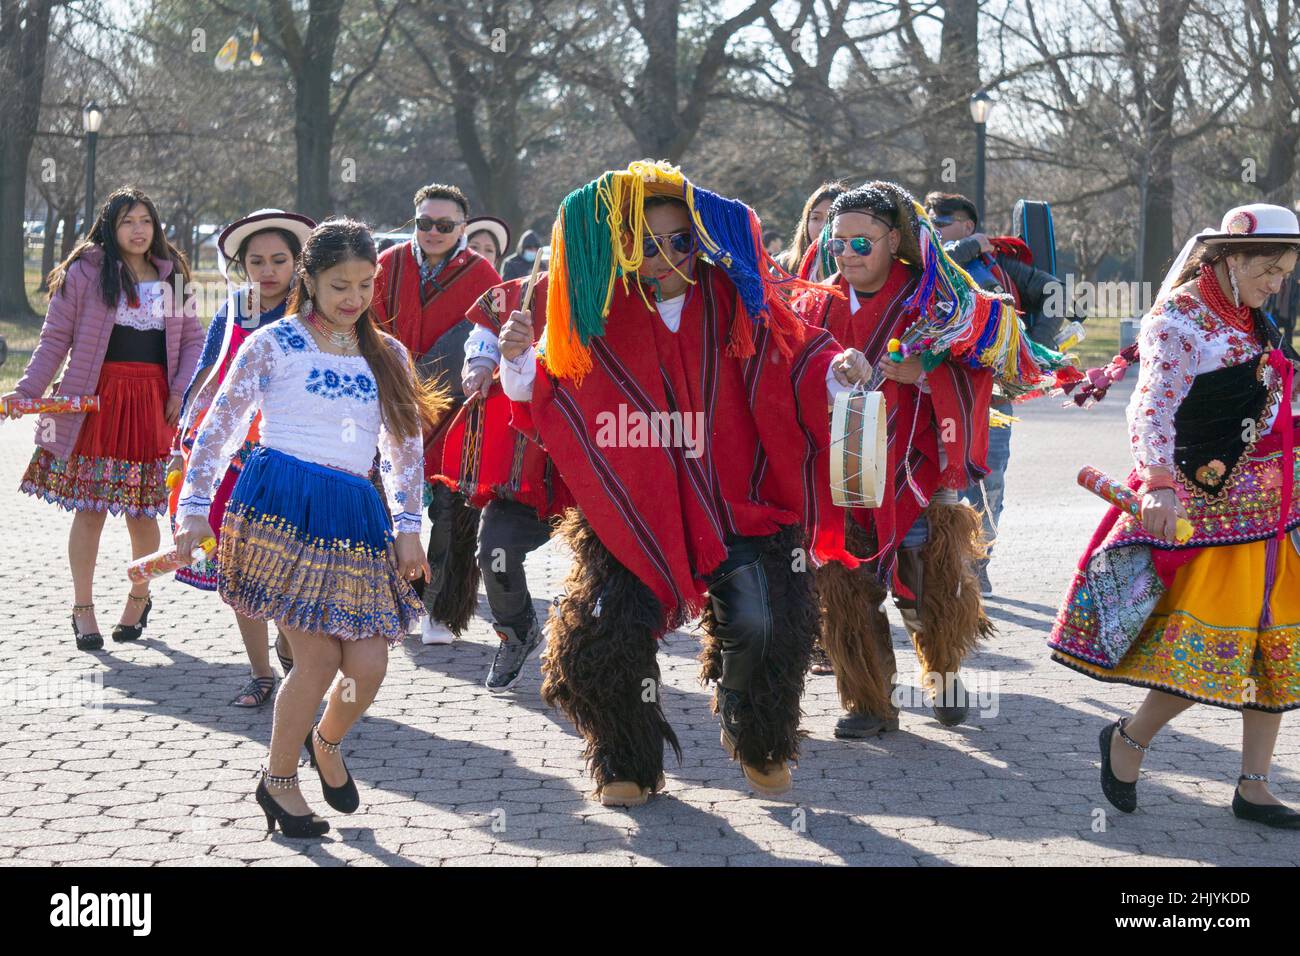 During a video shoot, a group of Ecuadorian dancers & musicians perform alongside the Unisphere in a  park in Queens, New York City. Stock Photo